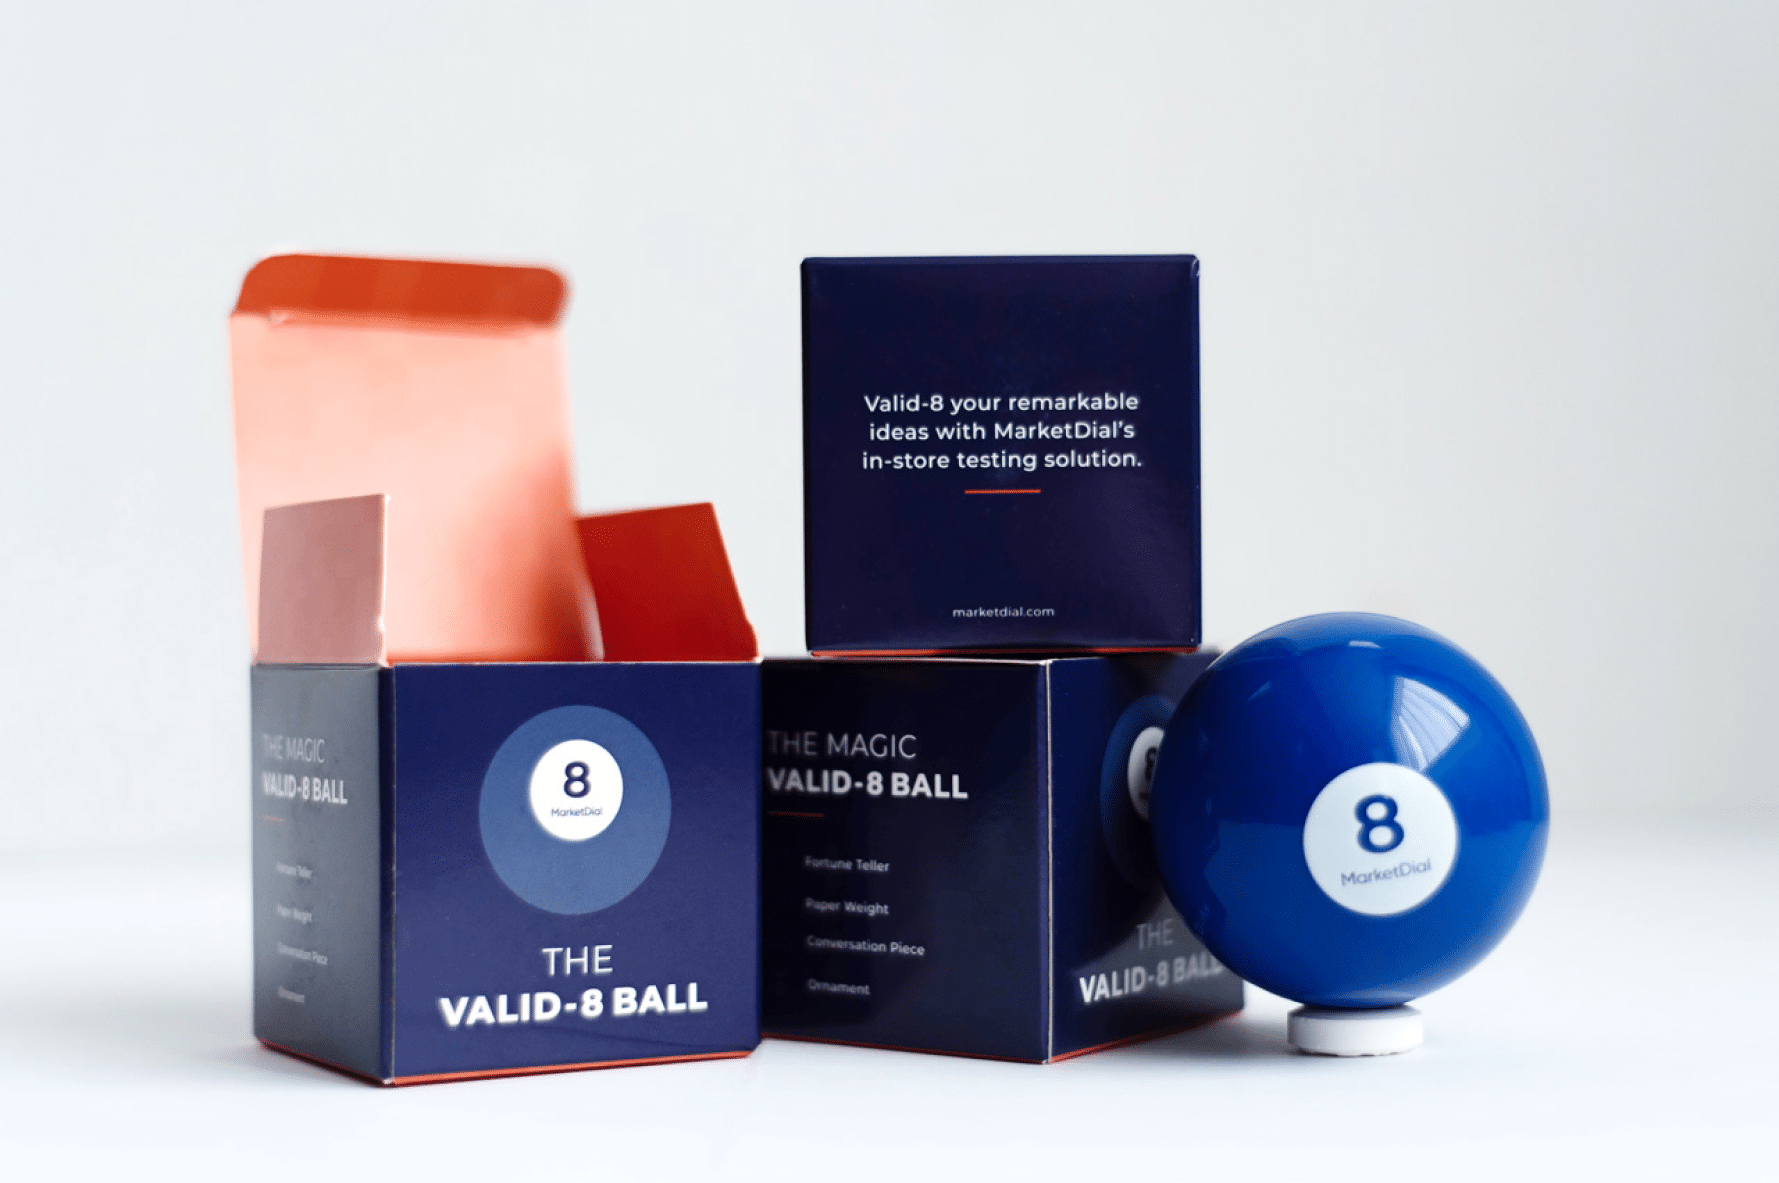 Marketdial branded magic 8 ball, sitting next to a well-designed box meant to hold the magic 8 ball.